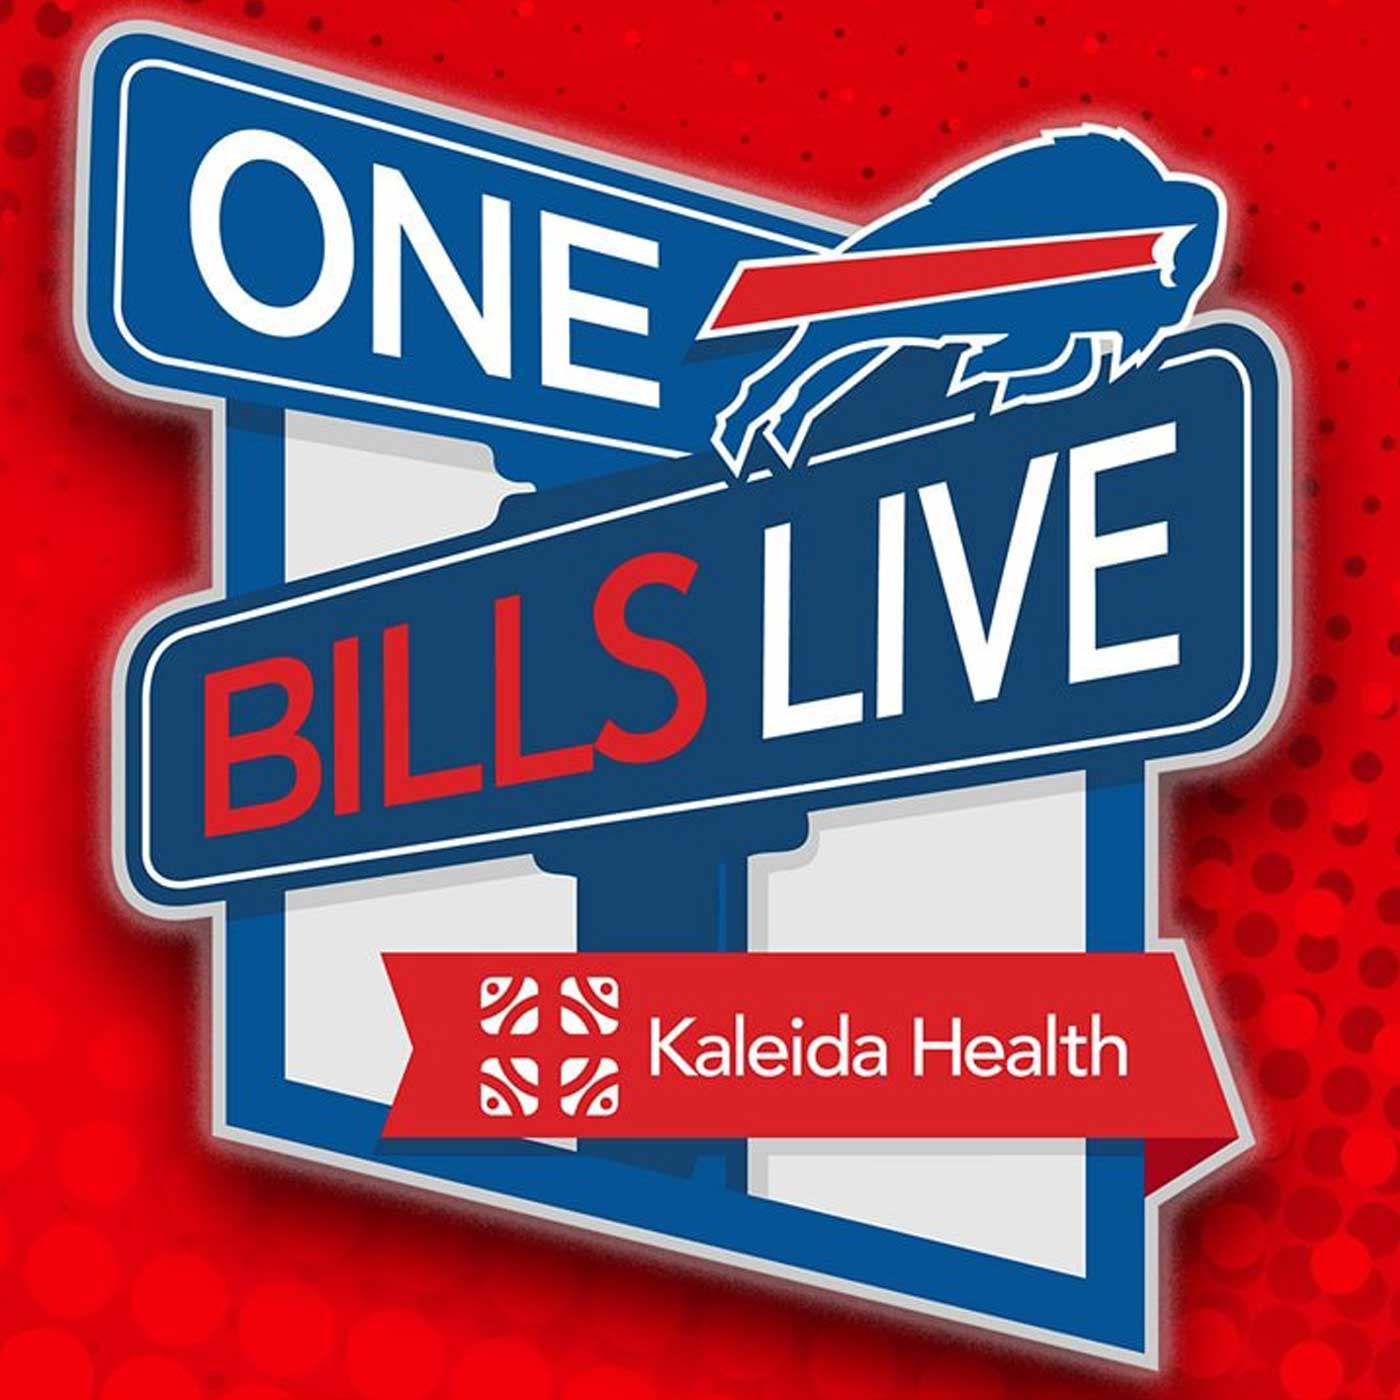 OBL 6/16: Bills announce training camp schedule, Knox and Epenesa speak to media